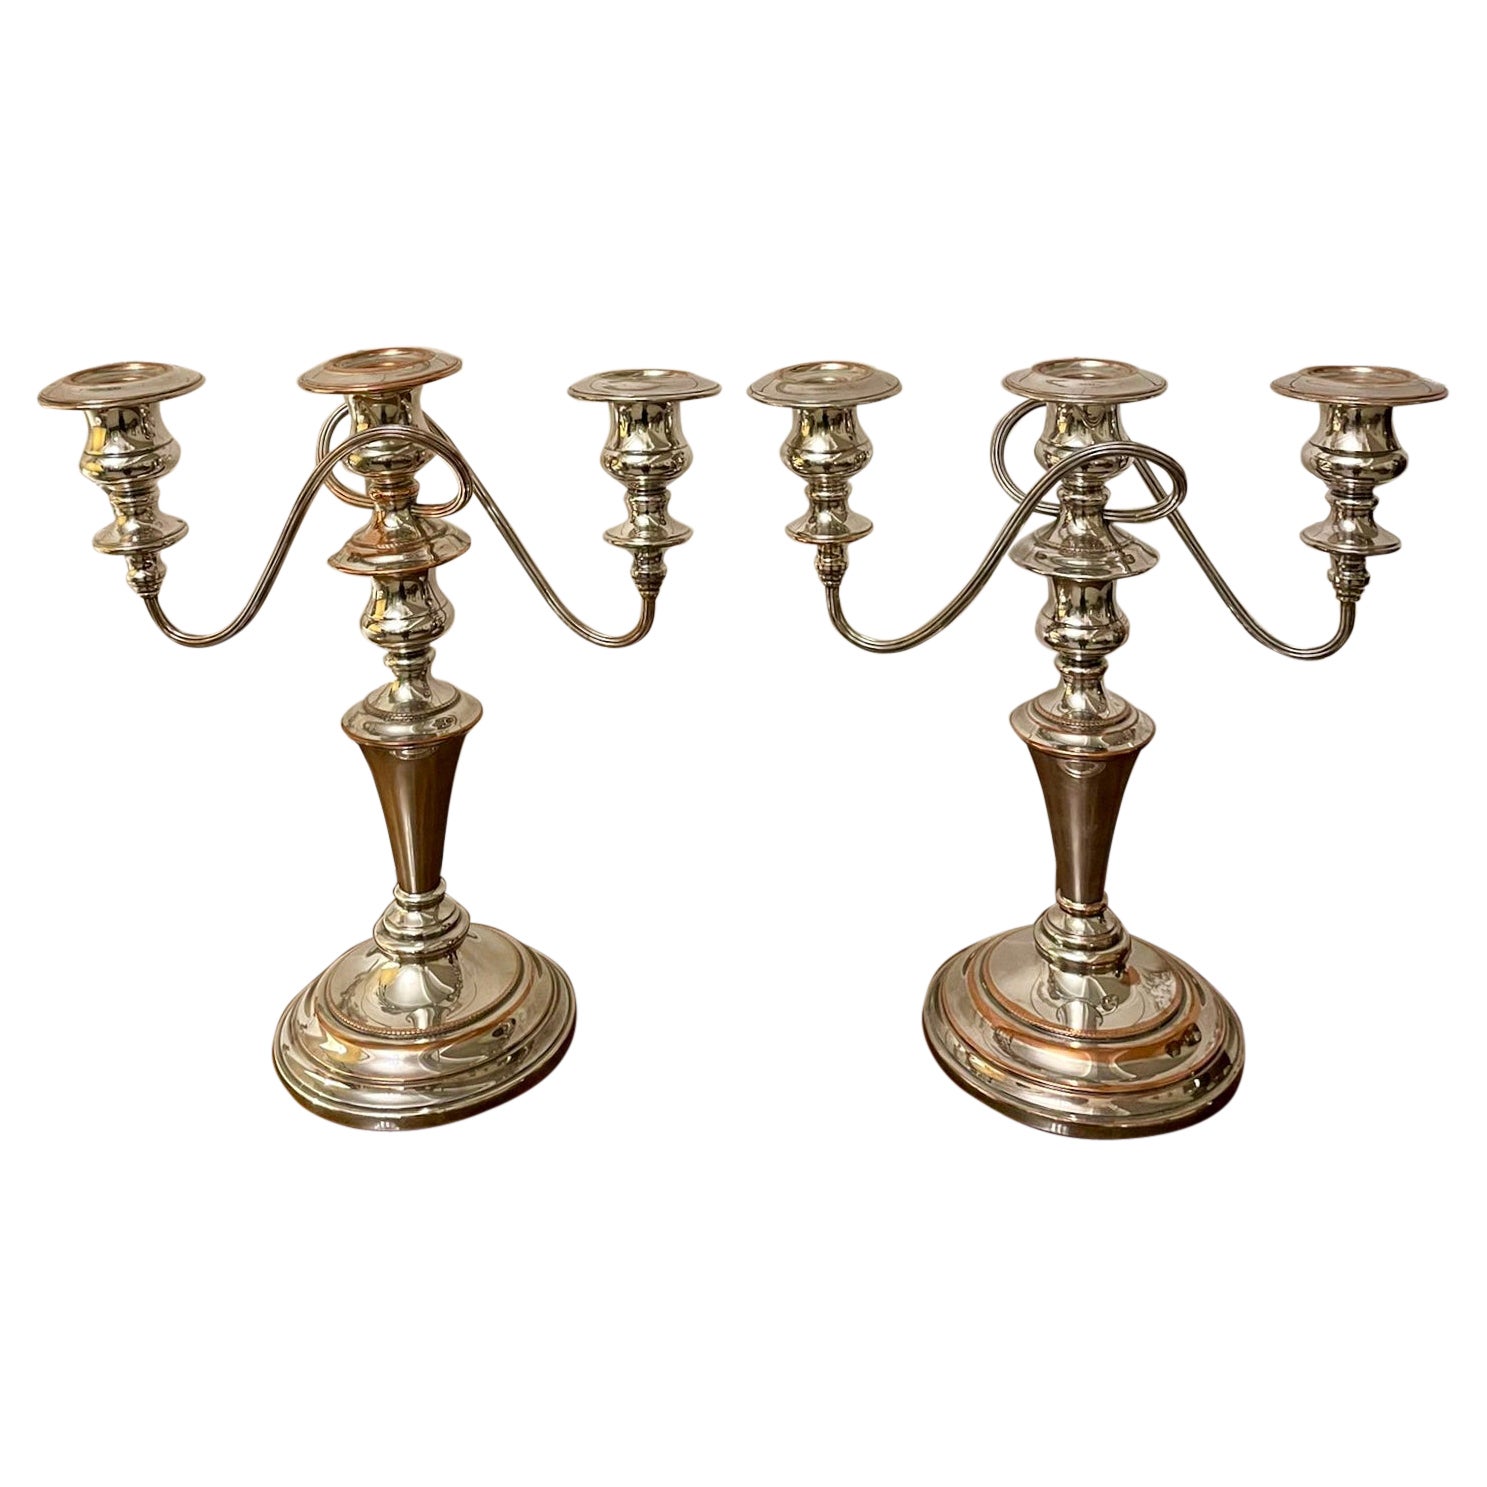 Pair of Antique Edwardian Silver Painted Candelabra